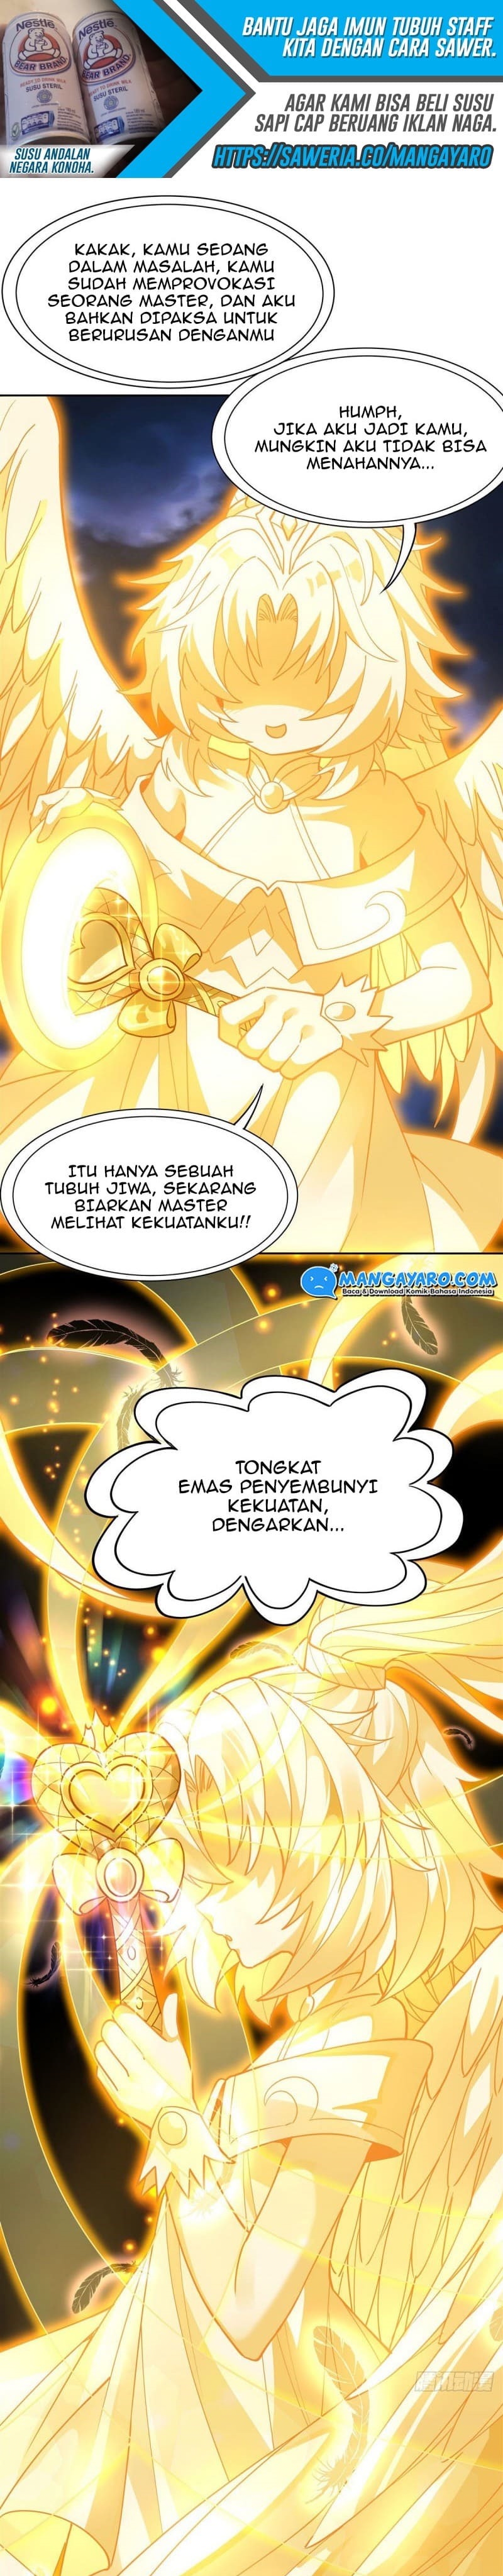 Dilarang COPAS - situs resmi www.mangacanblog.com - Komik my female apprentices are all big shots from the future 039 - chapter 39 40 Indonesia my female apprentices are all big shots from the future 039 - chapter 39 Terbaru 13|Baca Manga Komik Indonesia|Mangacan